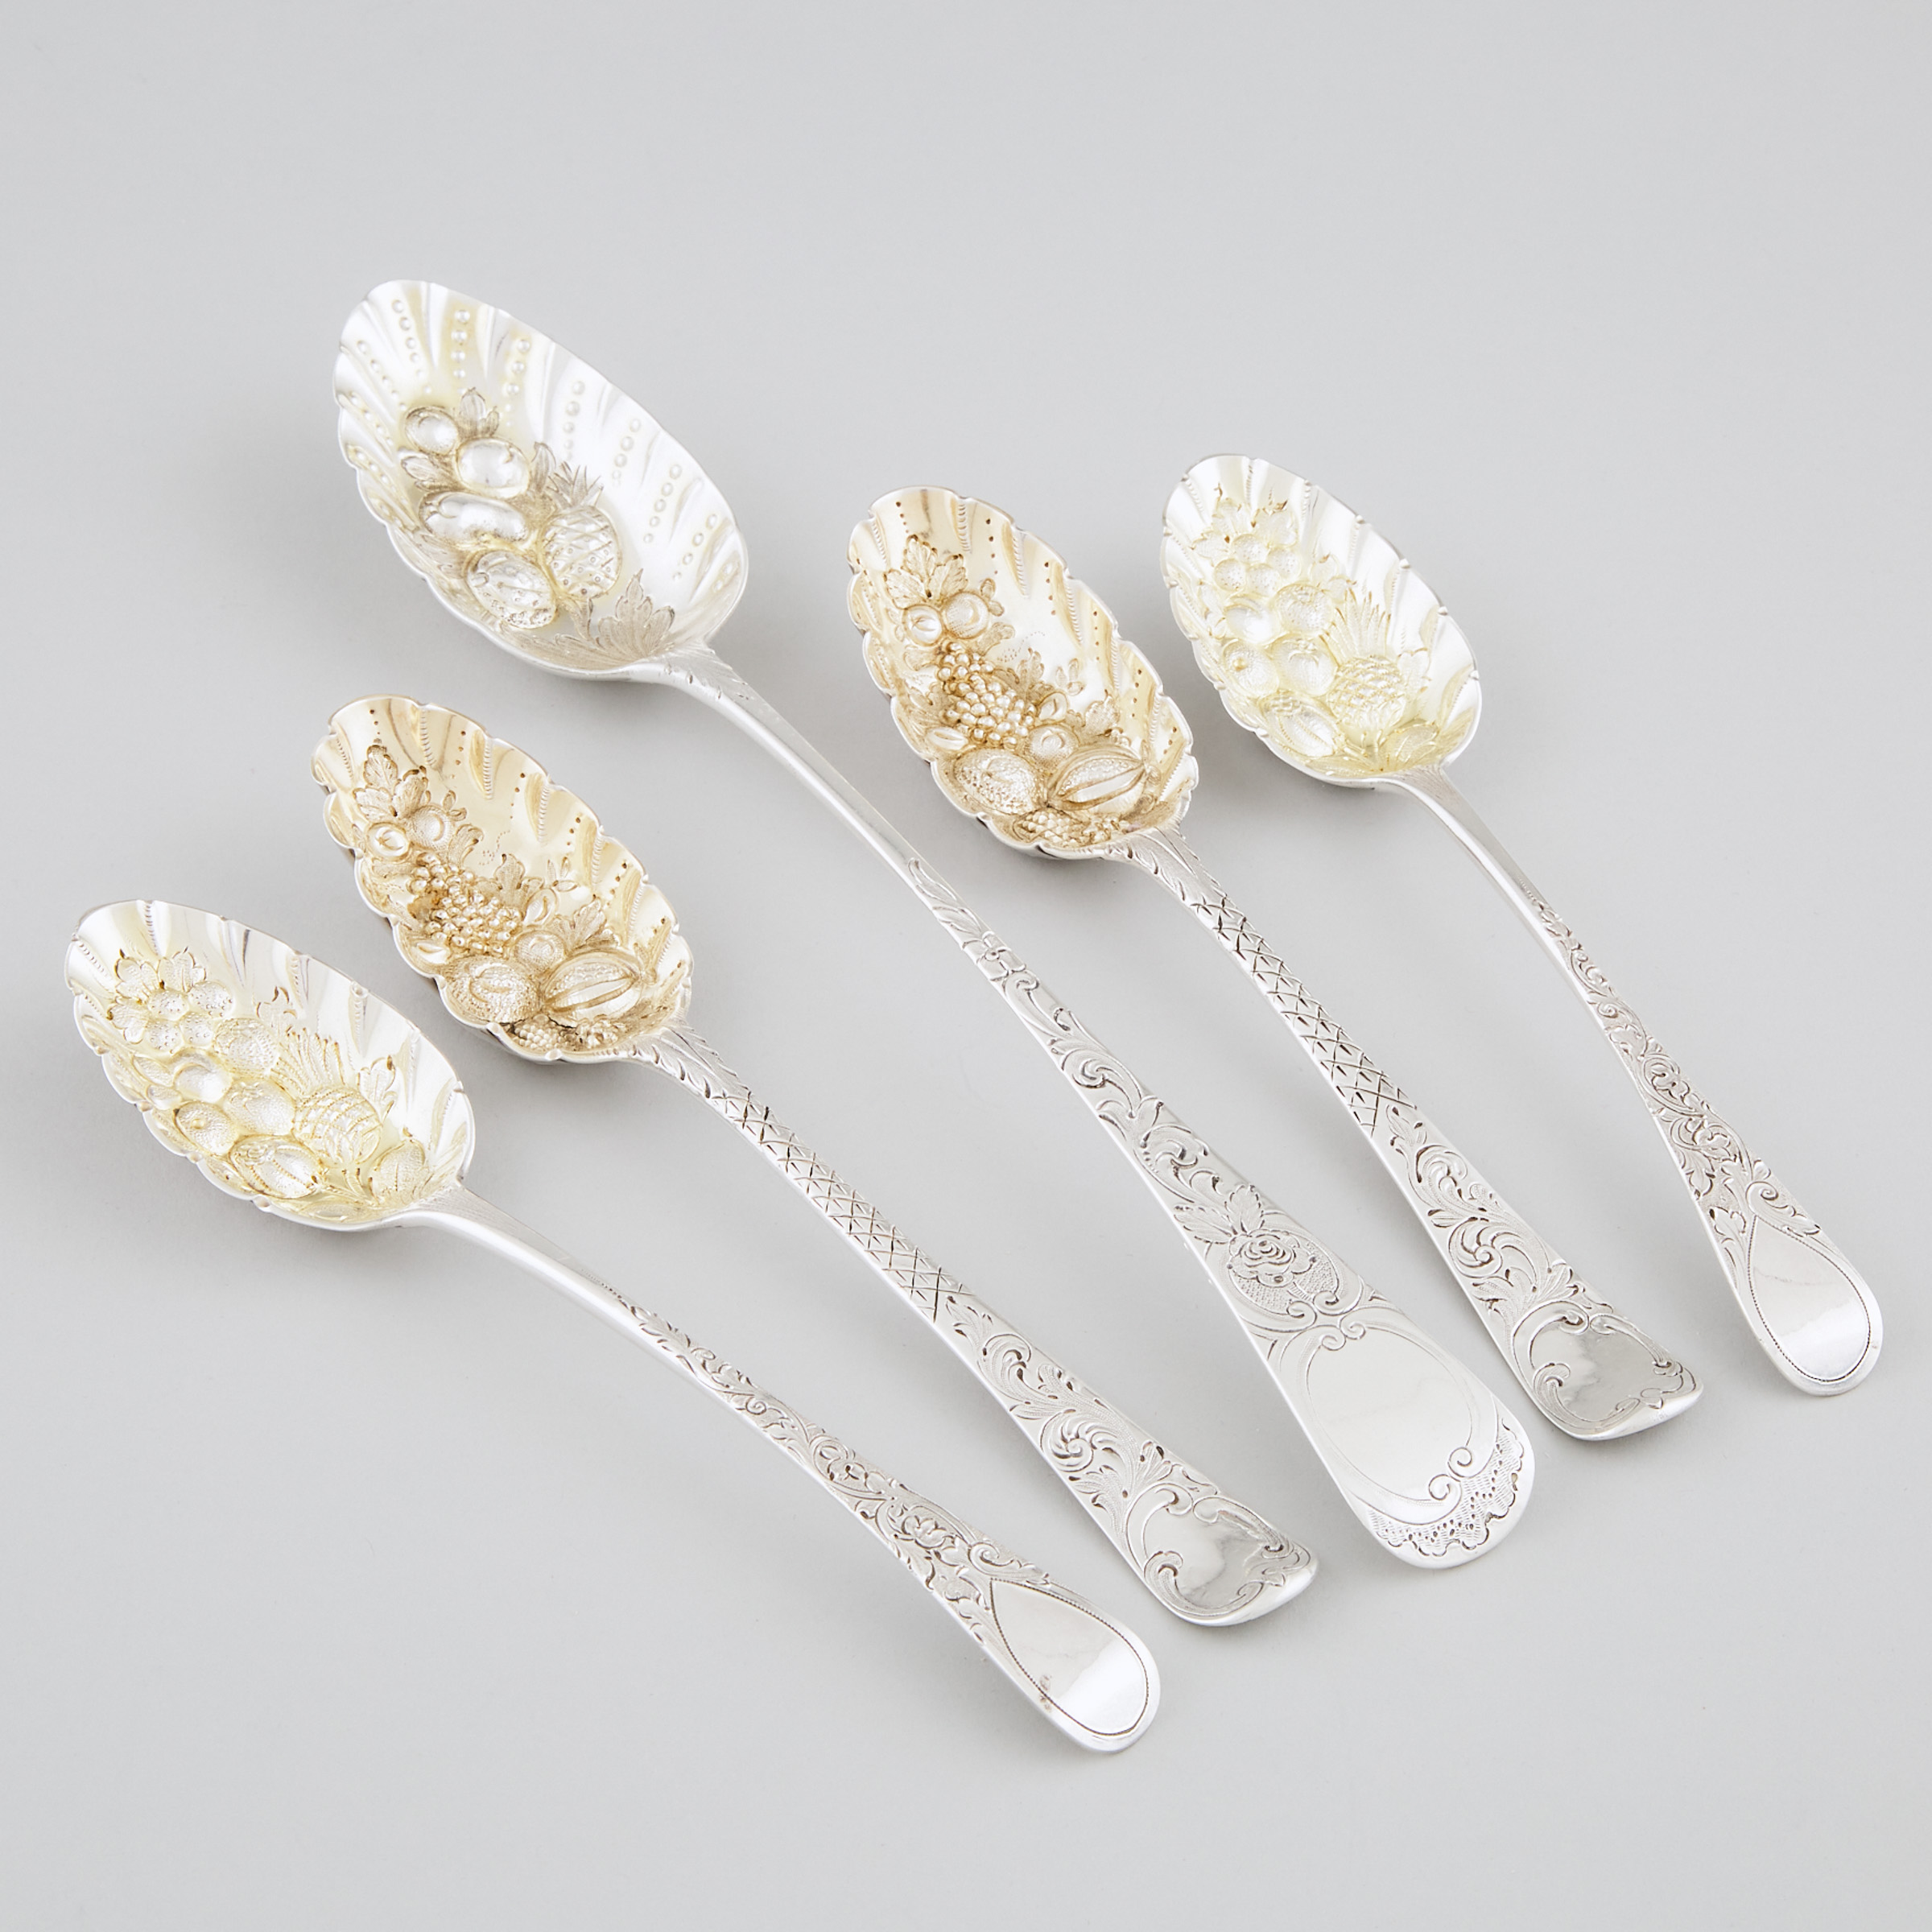 Two Pairs of Georgian Silver Berry Spoons and a Serving Spoon, Francis Spilsbury II, London, c.1770, William Bateman I, London, 1824 and George Wintle, London, 1809